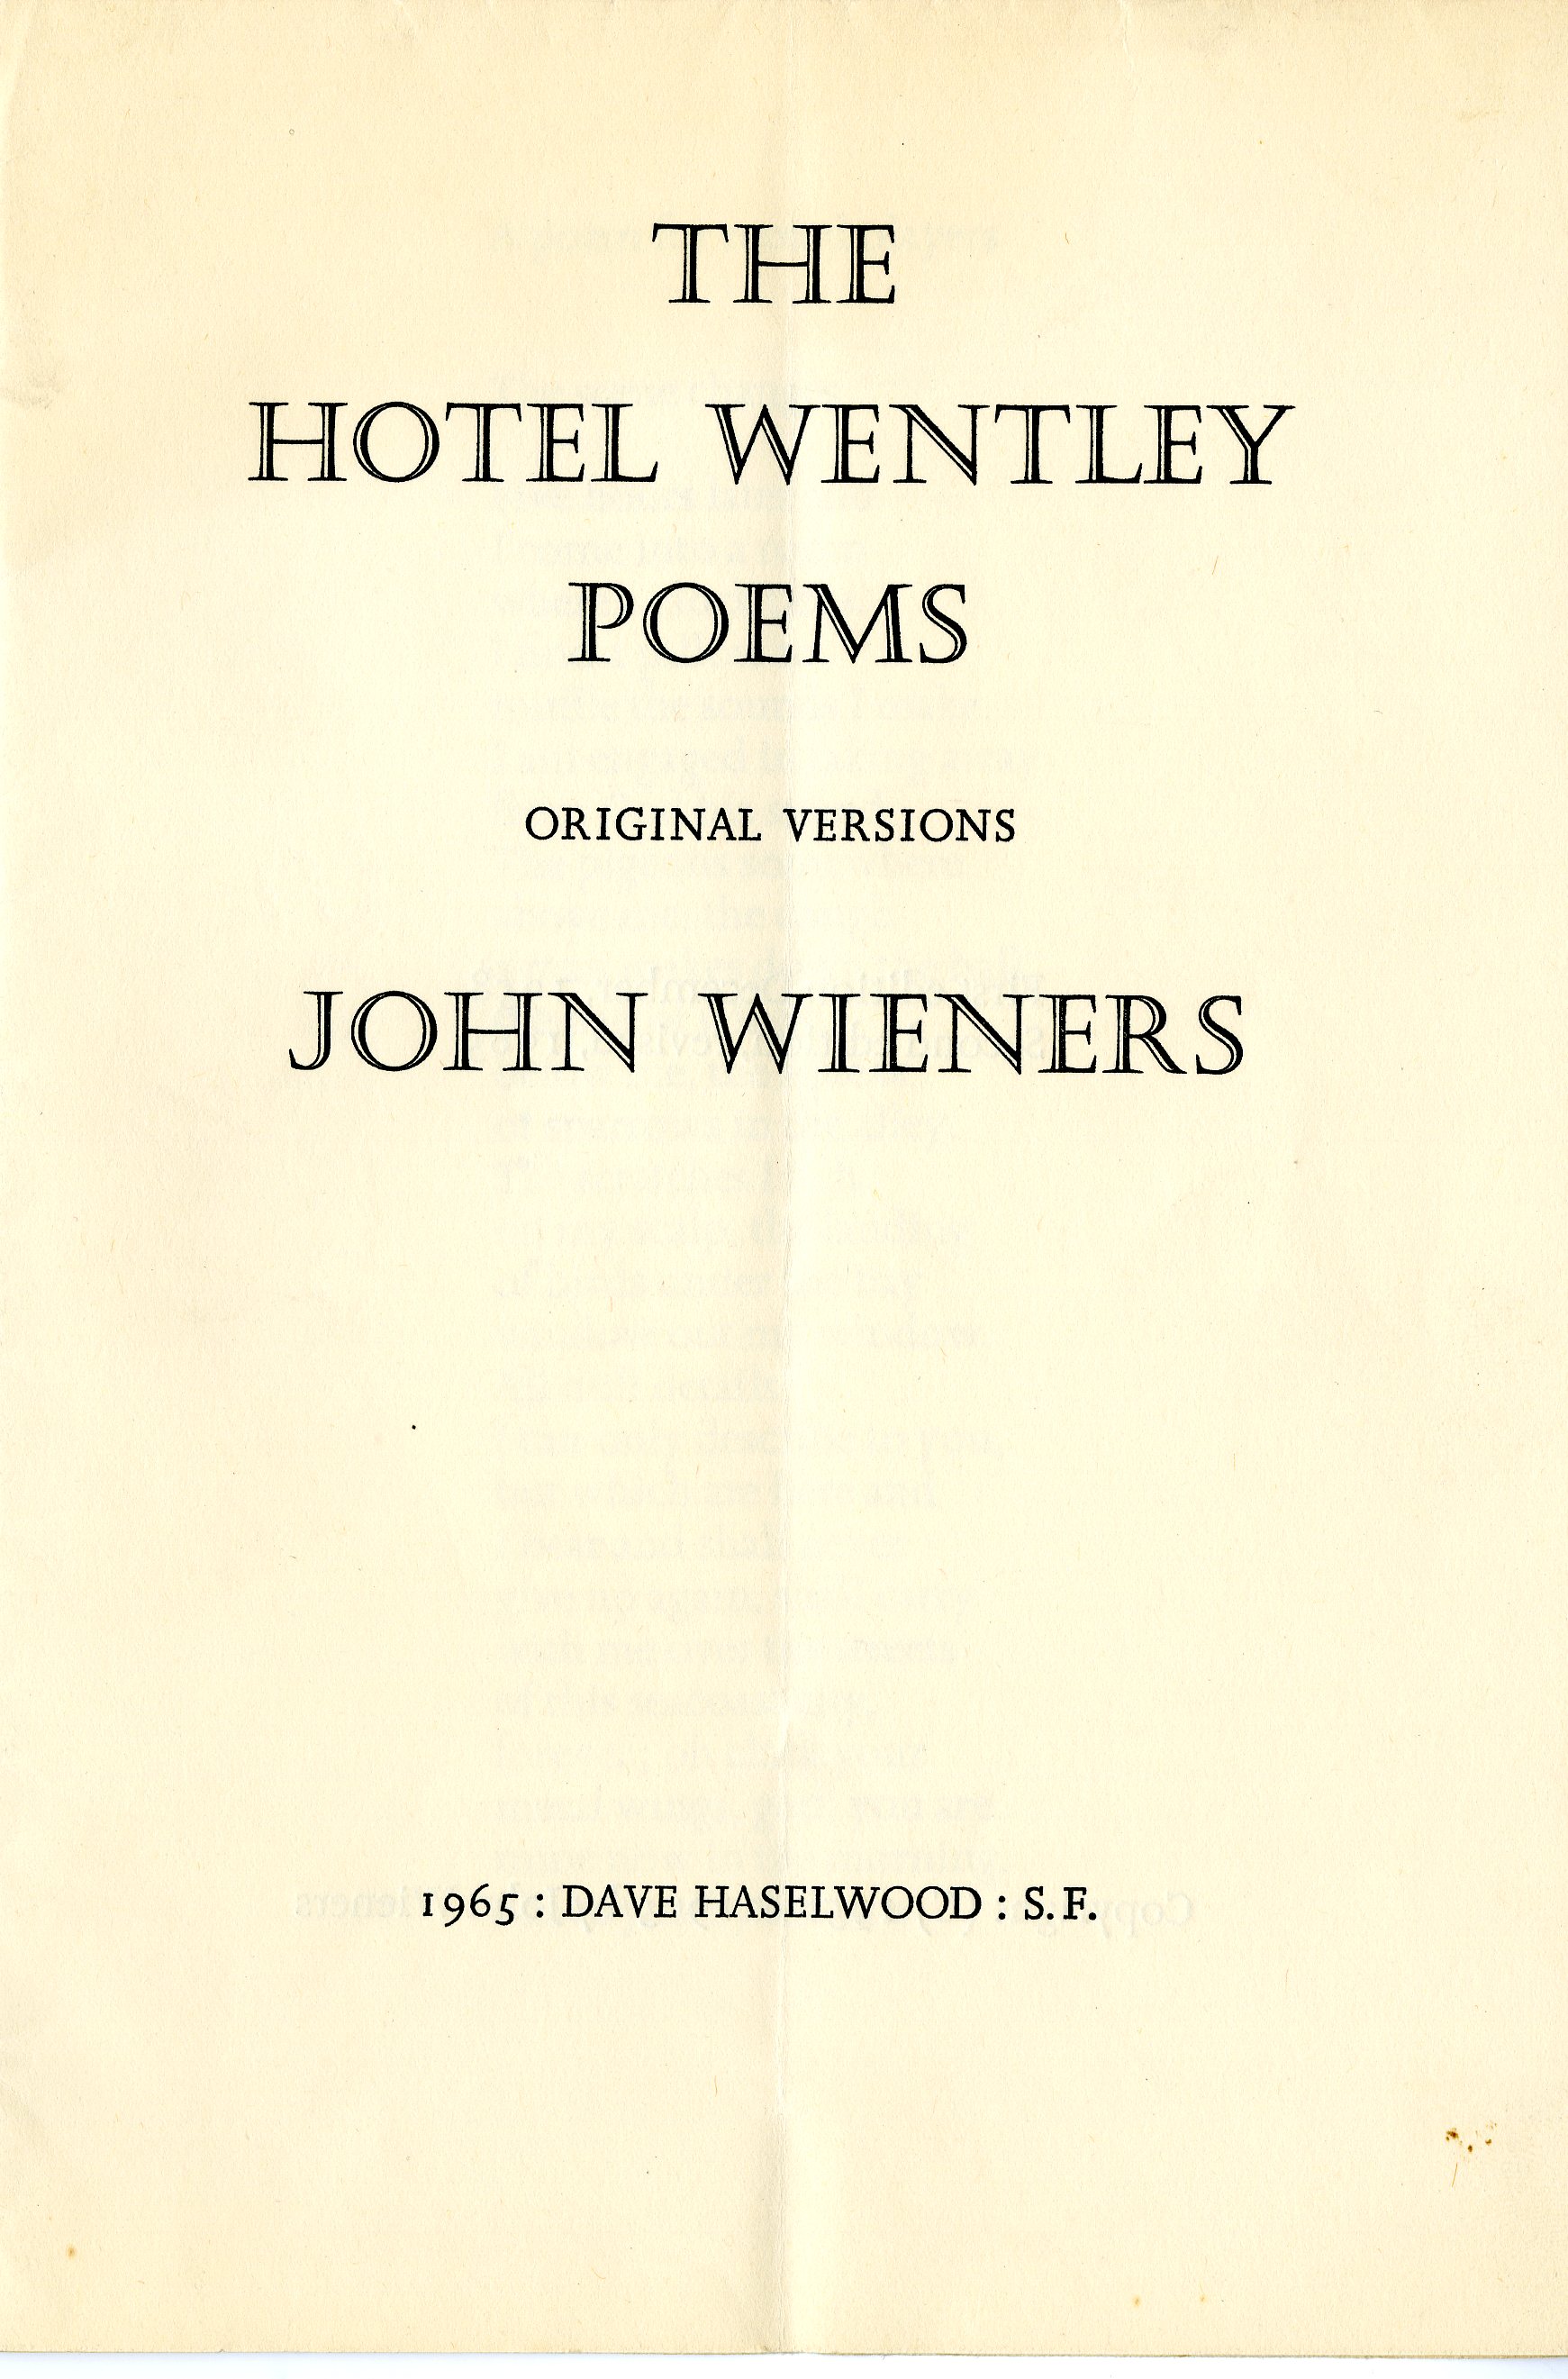 Wieners, John. The Hotel Wentley Poems: Original Versions (Dave Haselwood, 1965): letterpress proof, 1965, from the David Haselwood publisher’s files for The Hotel Wentley Poems (1965)